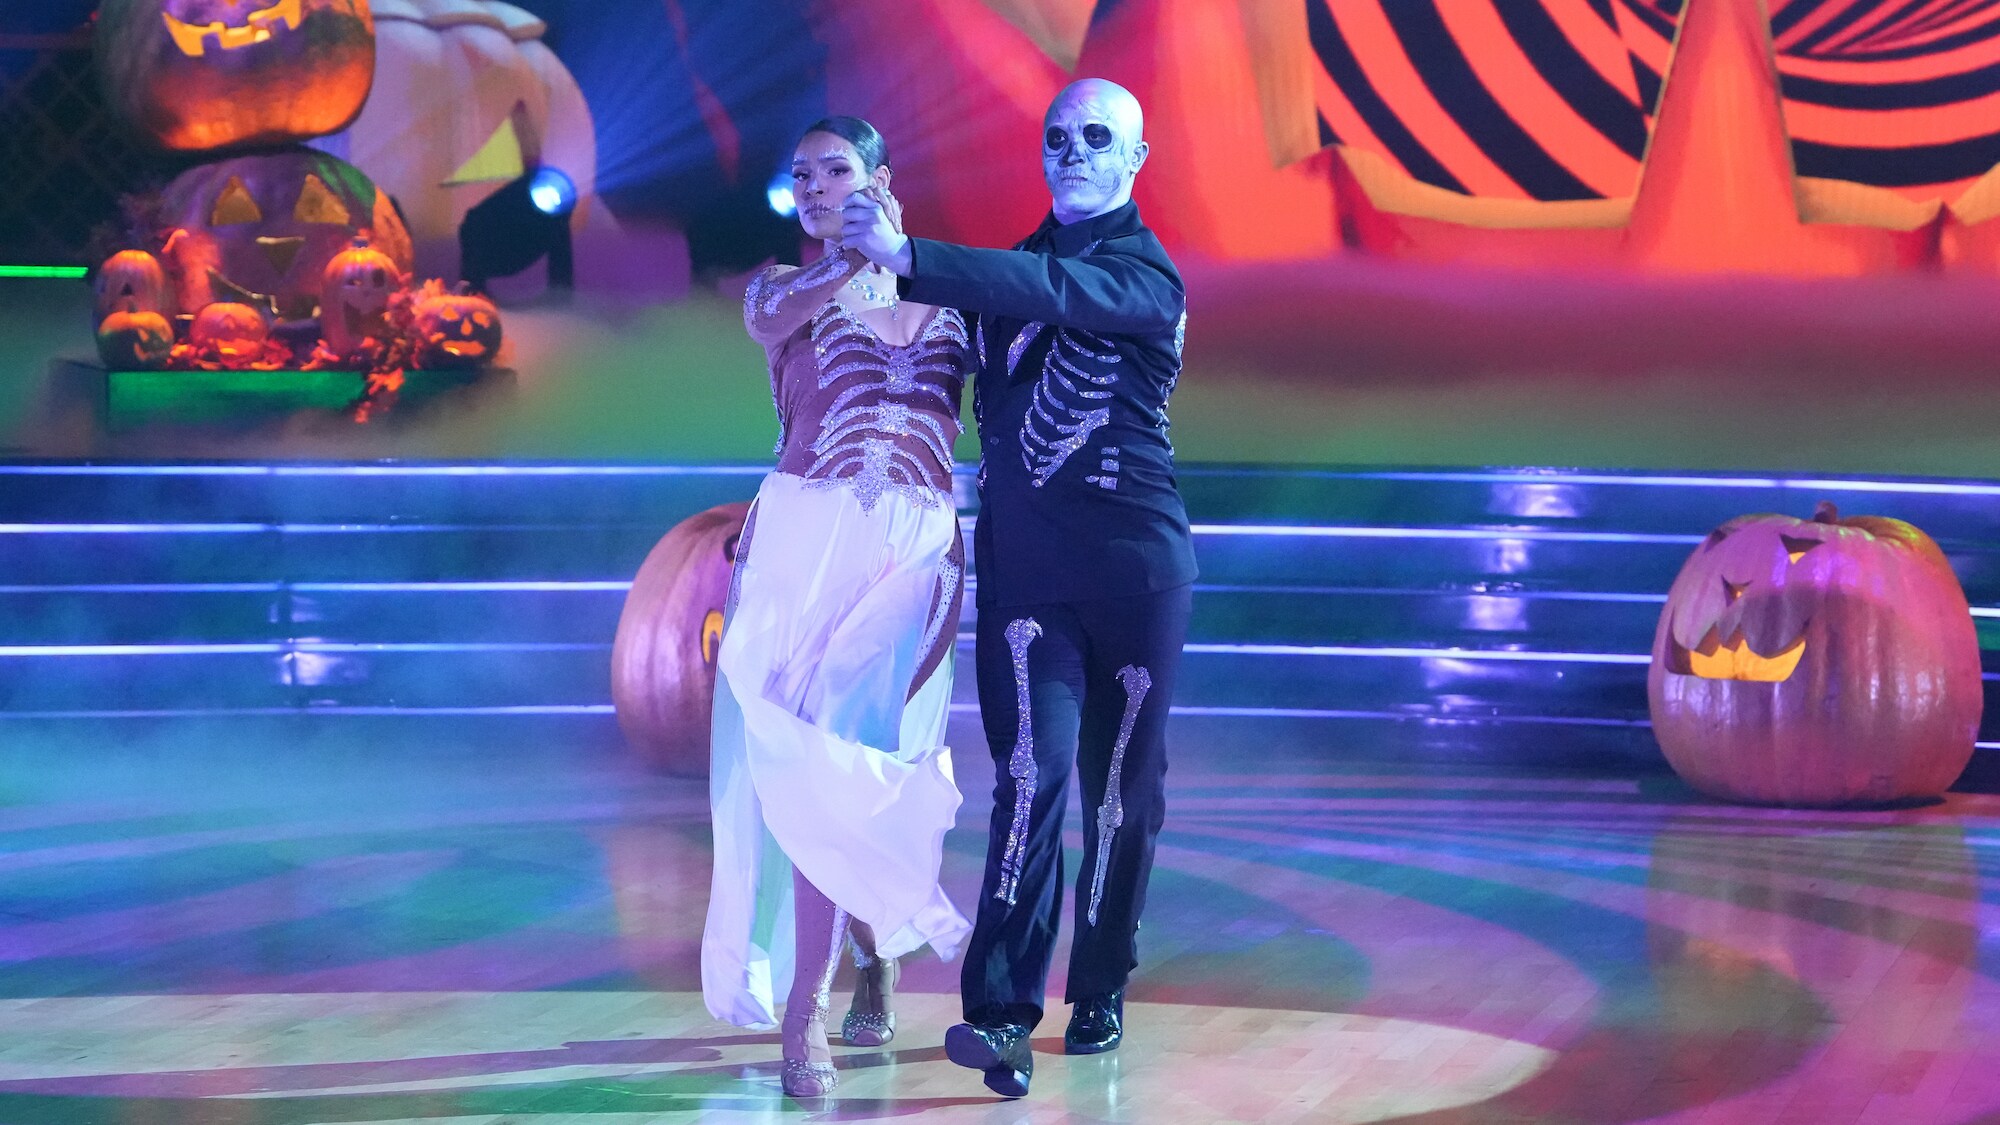 DANCING WITH THE STARS - “Halloween Night” – The ballroom transforms for a haunting “Halloween Night” as the nine remaining couples perform bewitching new routines. As an extra trick (or treat), the contestants are split into groups to compete in a terrifying team dance. “Dancing with the Stars” will stream live MONDAY, OCT. 31 (8:00pm ET / 5:00pm PT), on Disney+. (ABC/Eric McCandless) JORDIN SPARKS, BRANDON ARMSTRONG